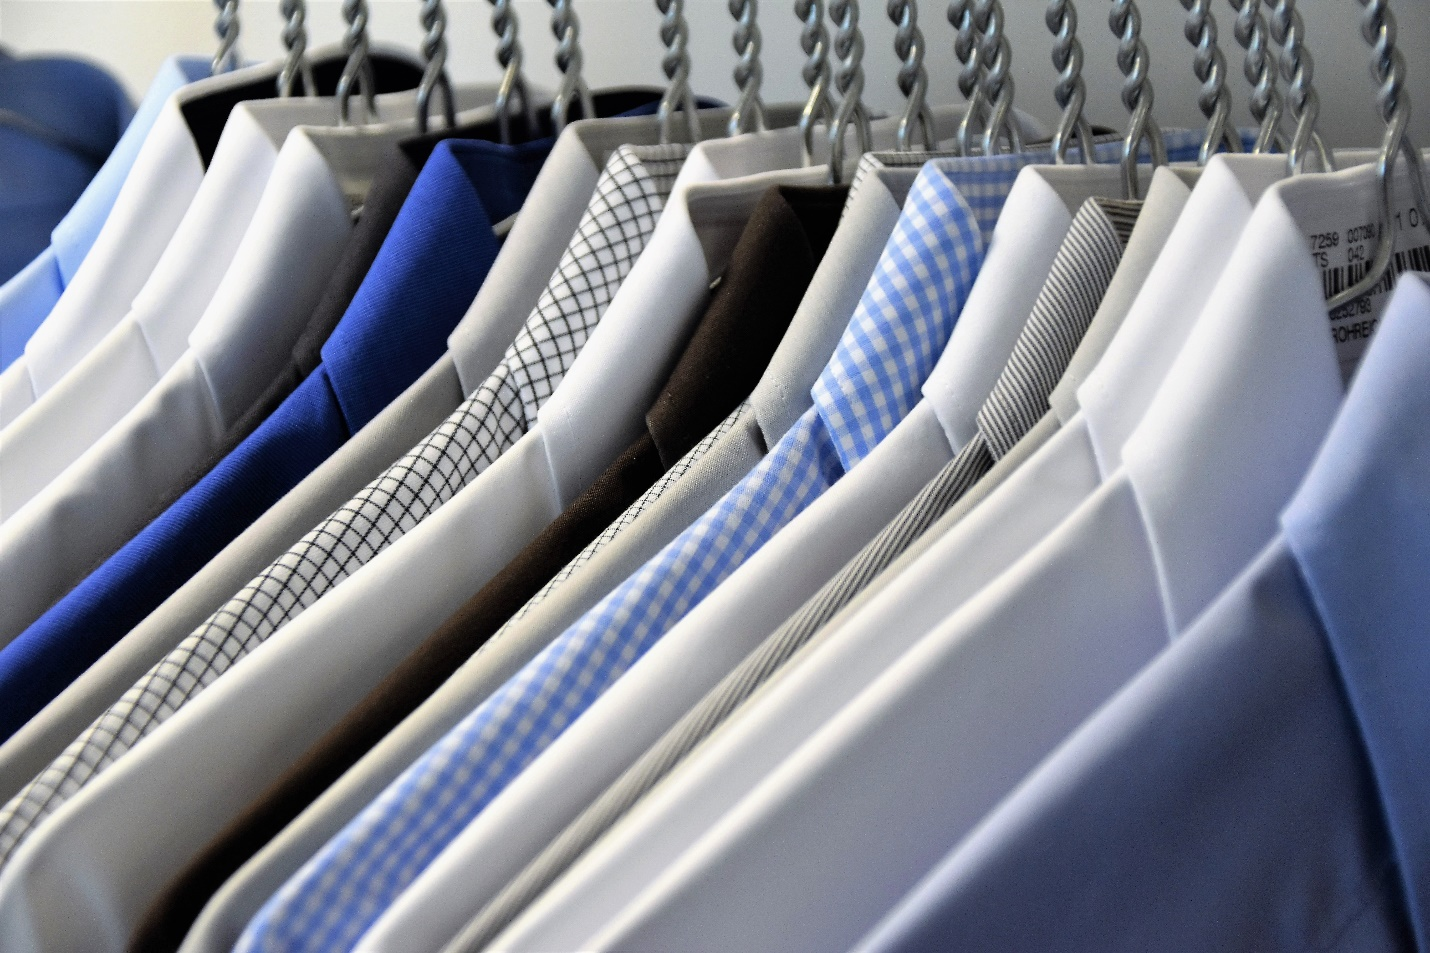 Office shirts neatly ironed and hung.